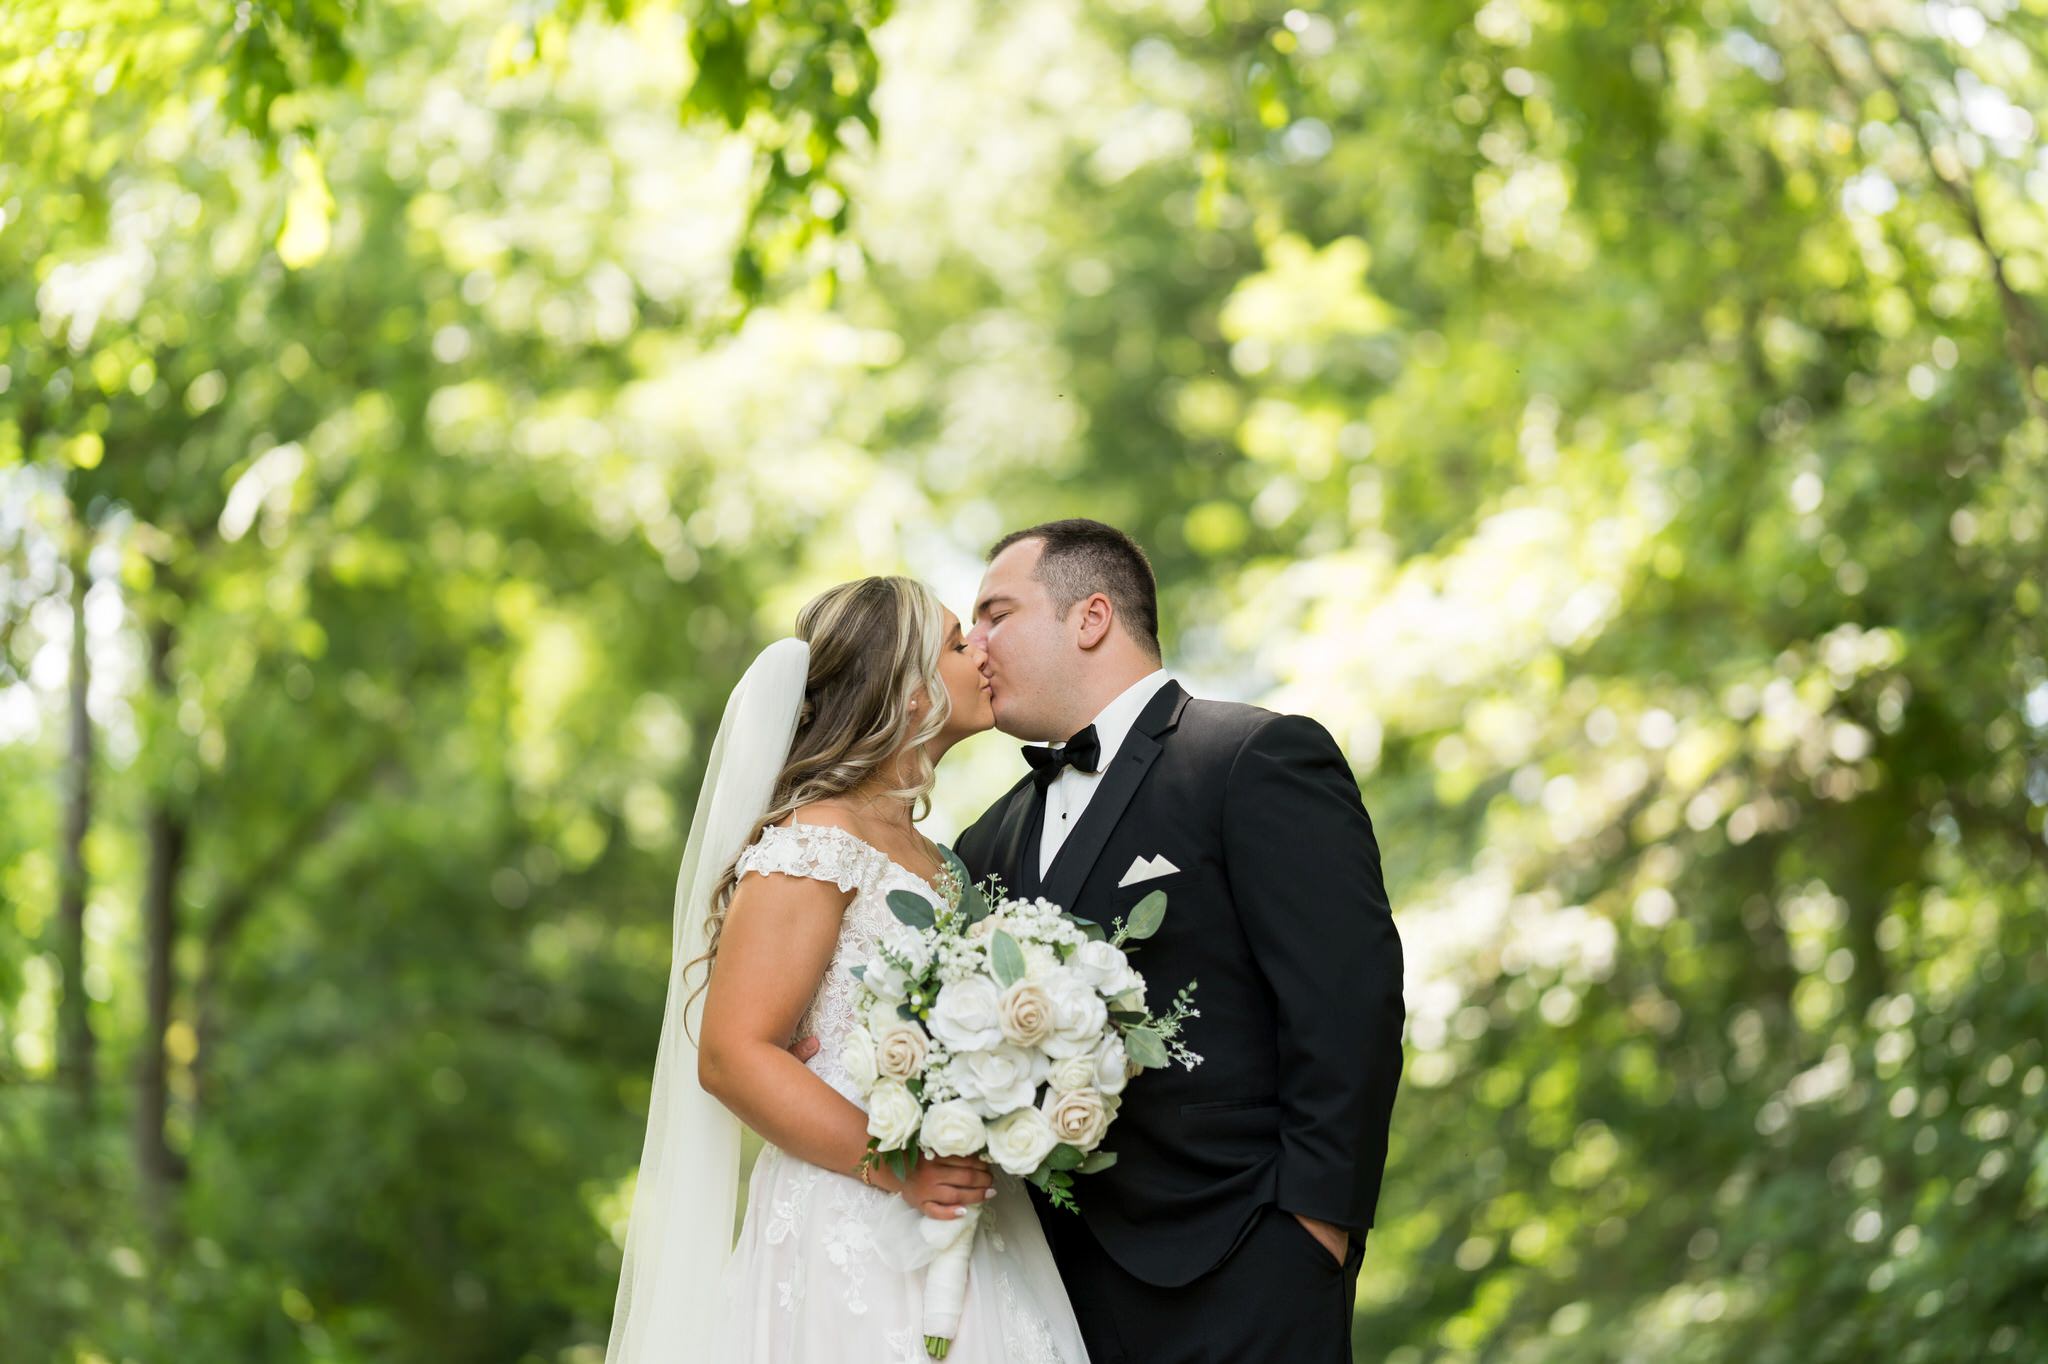 A bride and groom kiss among the trees at their Stony Creek wedding.  